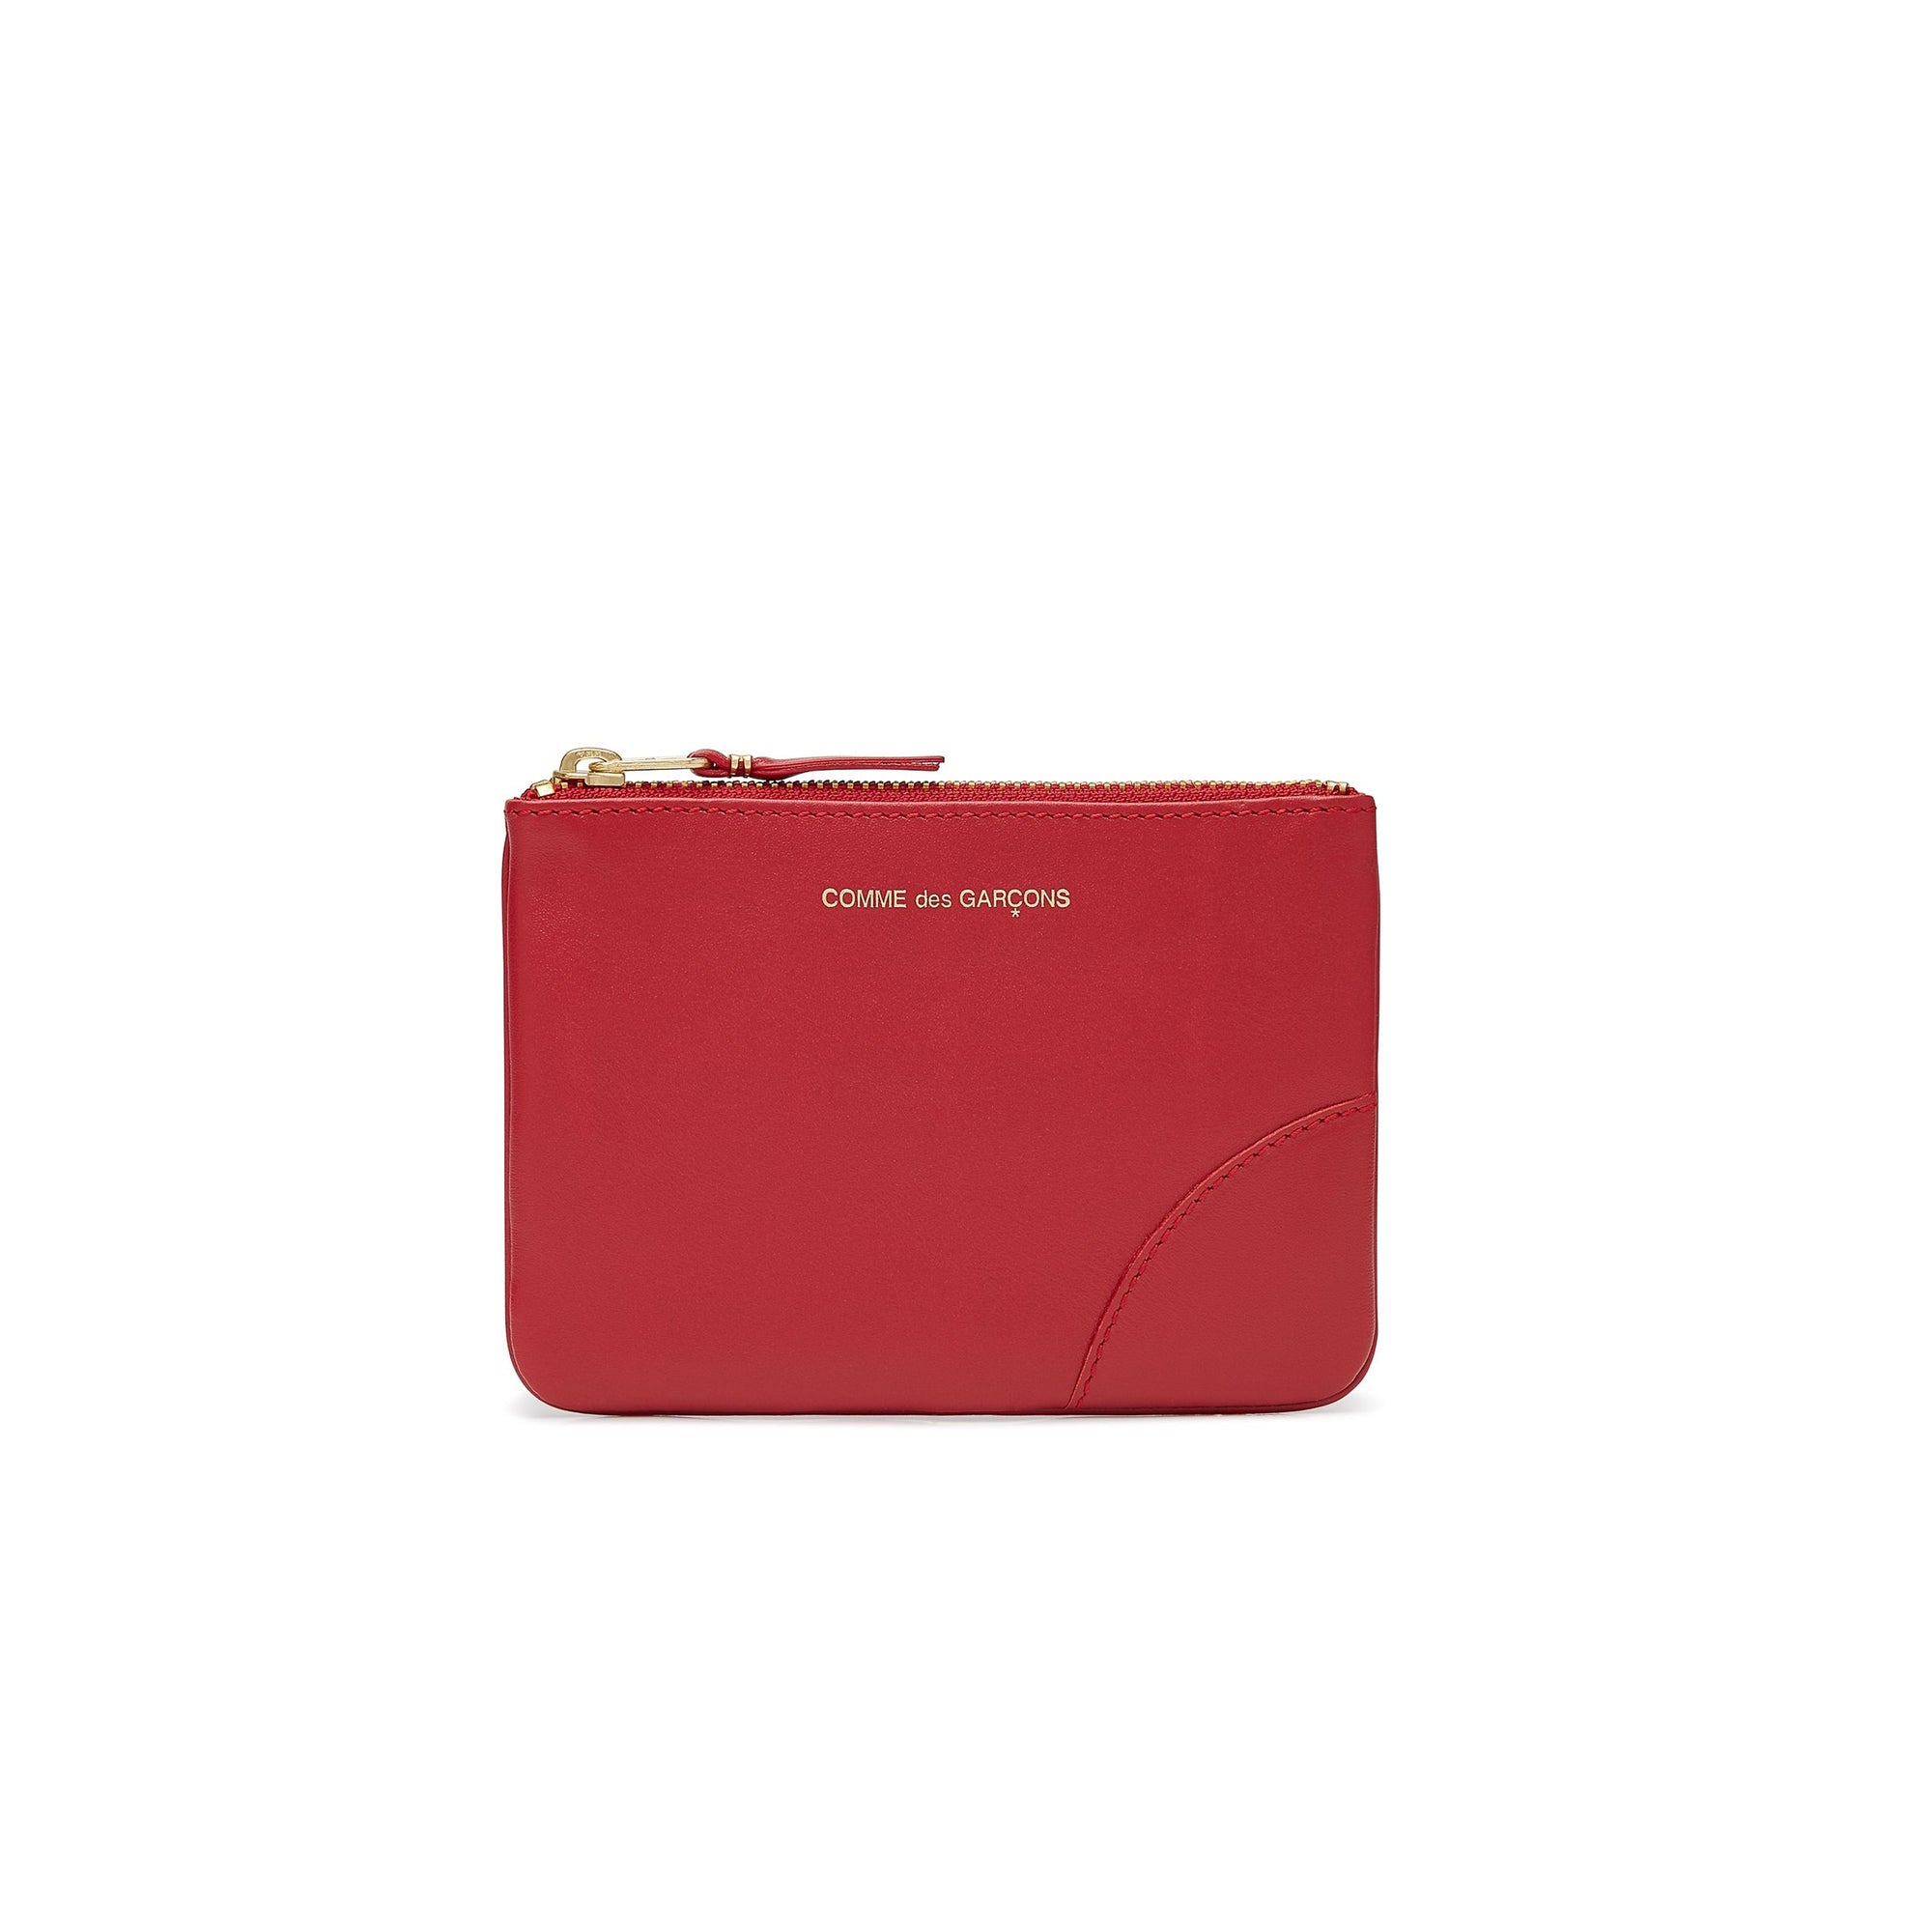 CDG WALLET - Colored Leather - (SA8100 Red) view 1